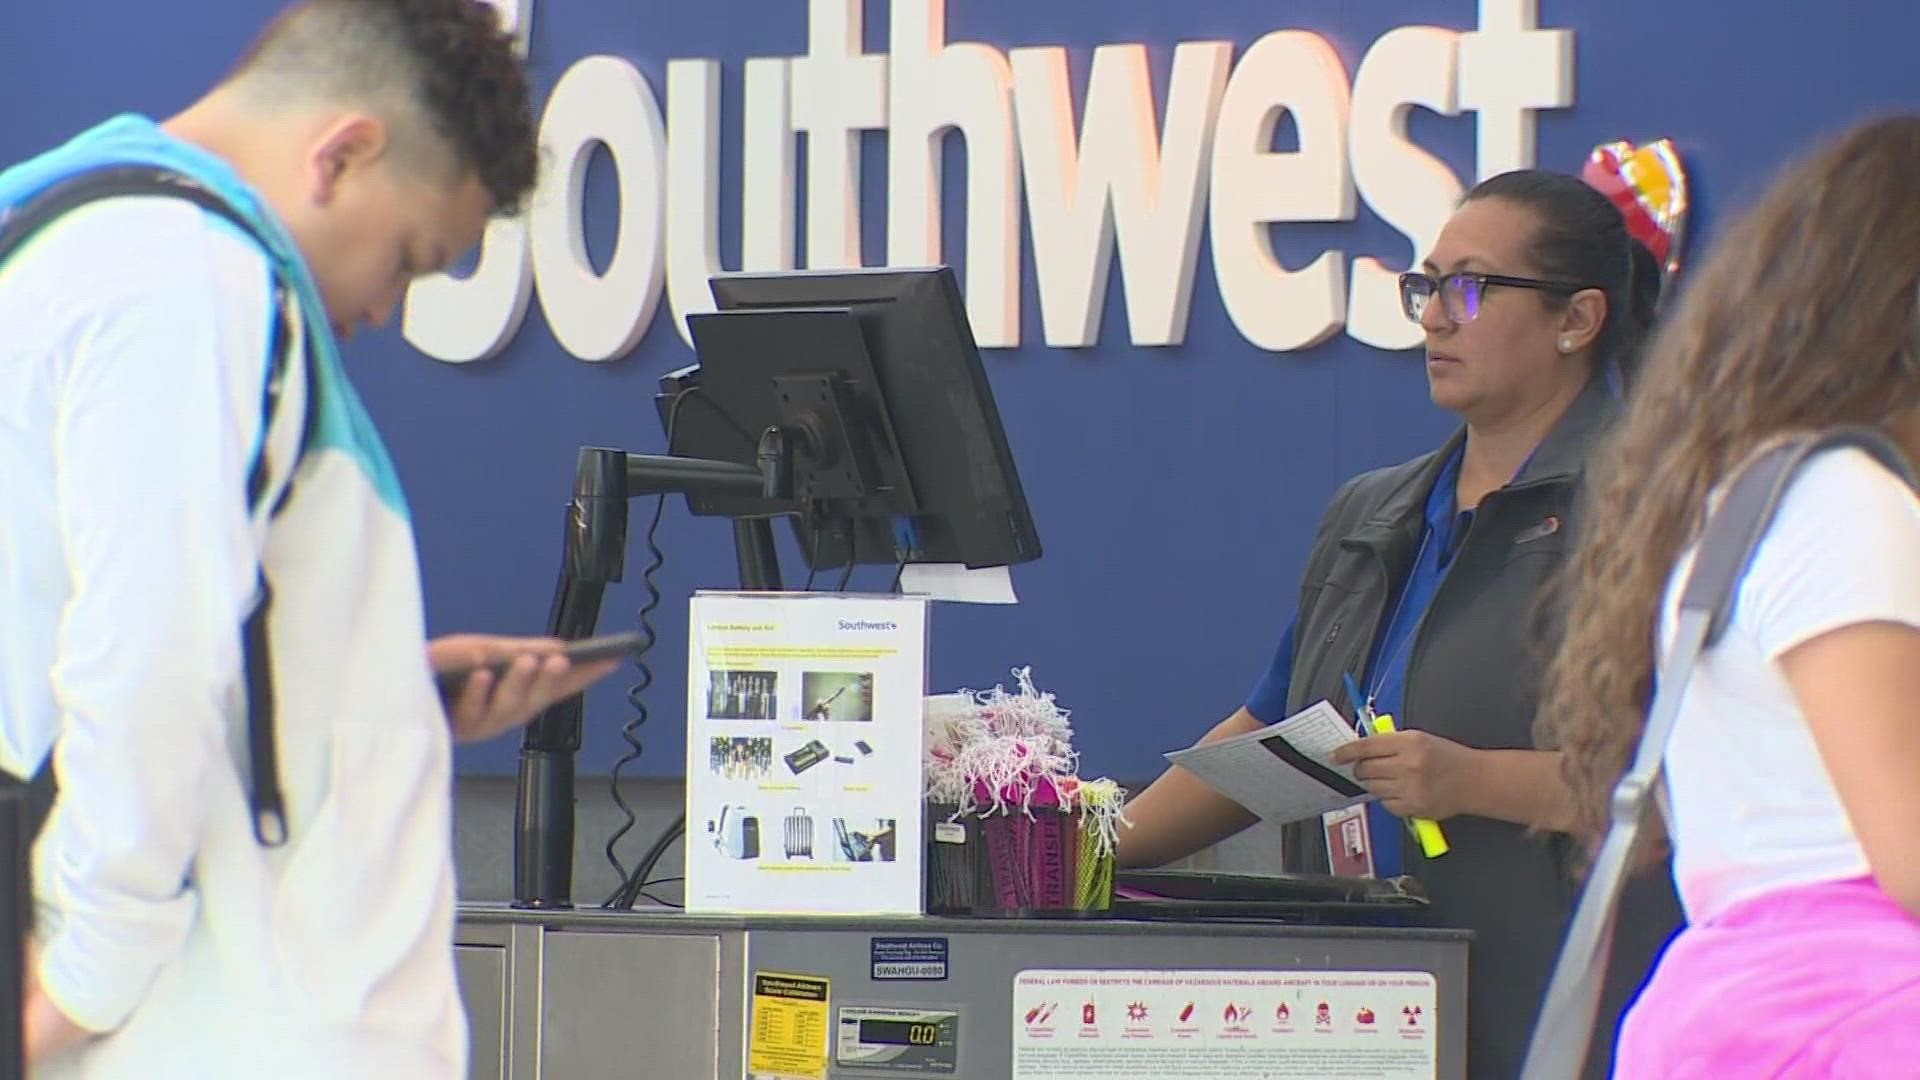 Southwest Airlines is now back to normal operations after canceling more than 2,000 flights this week.